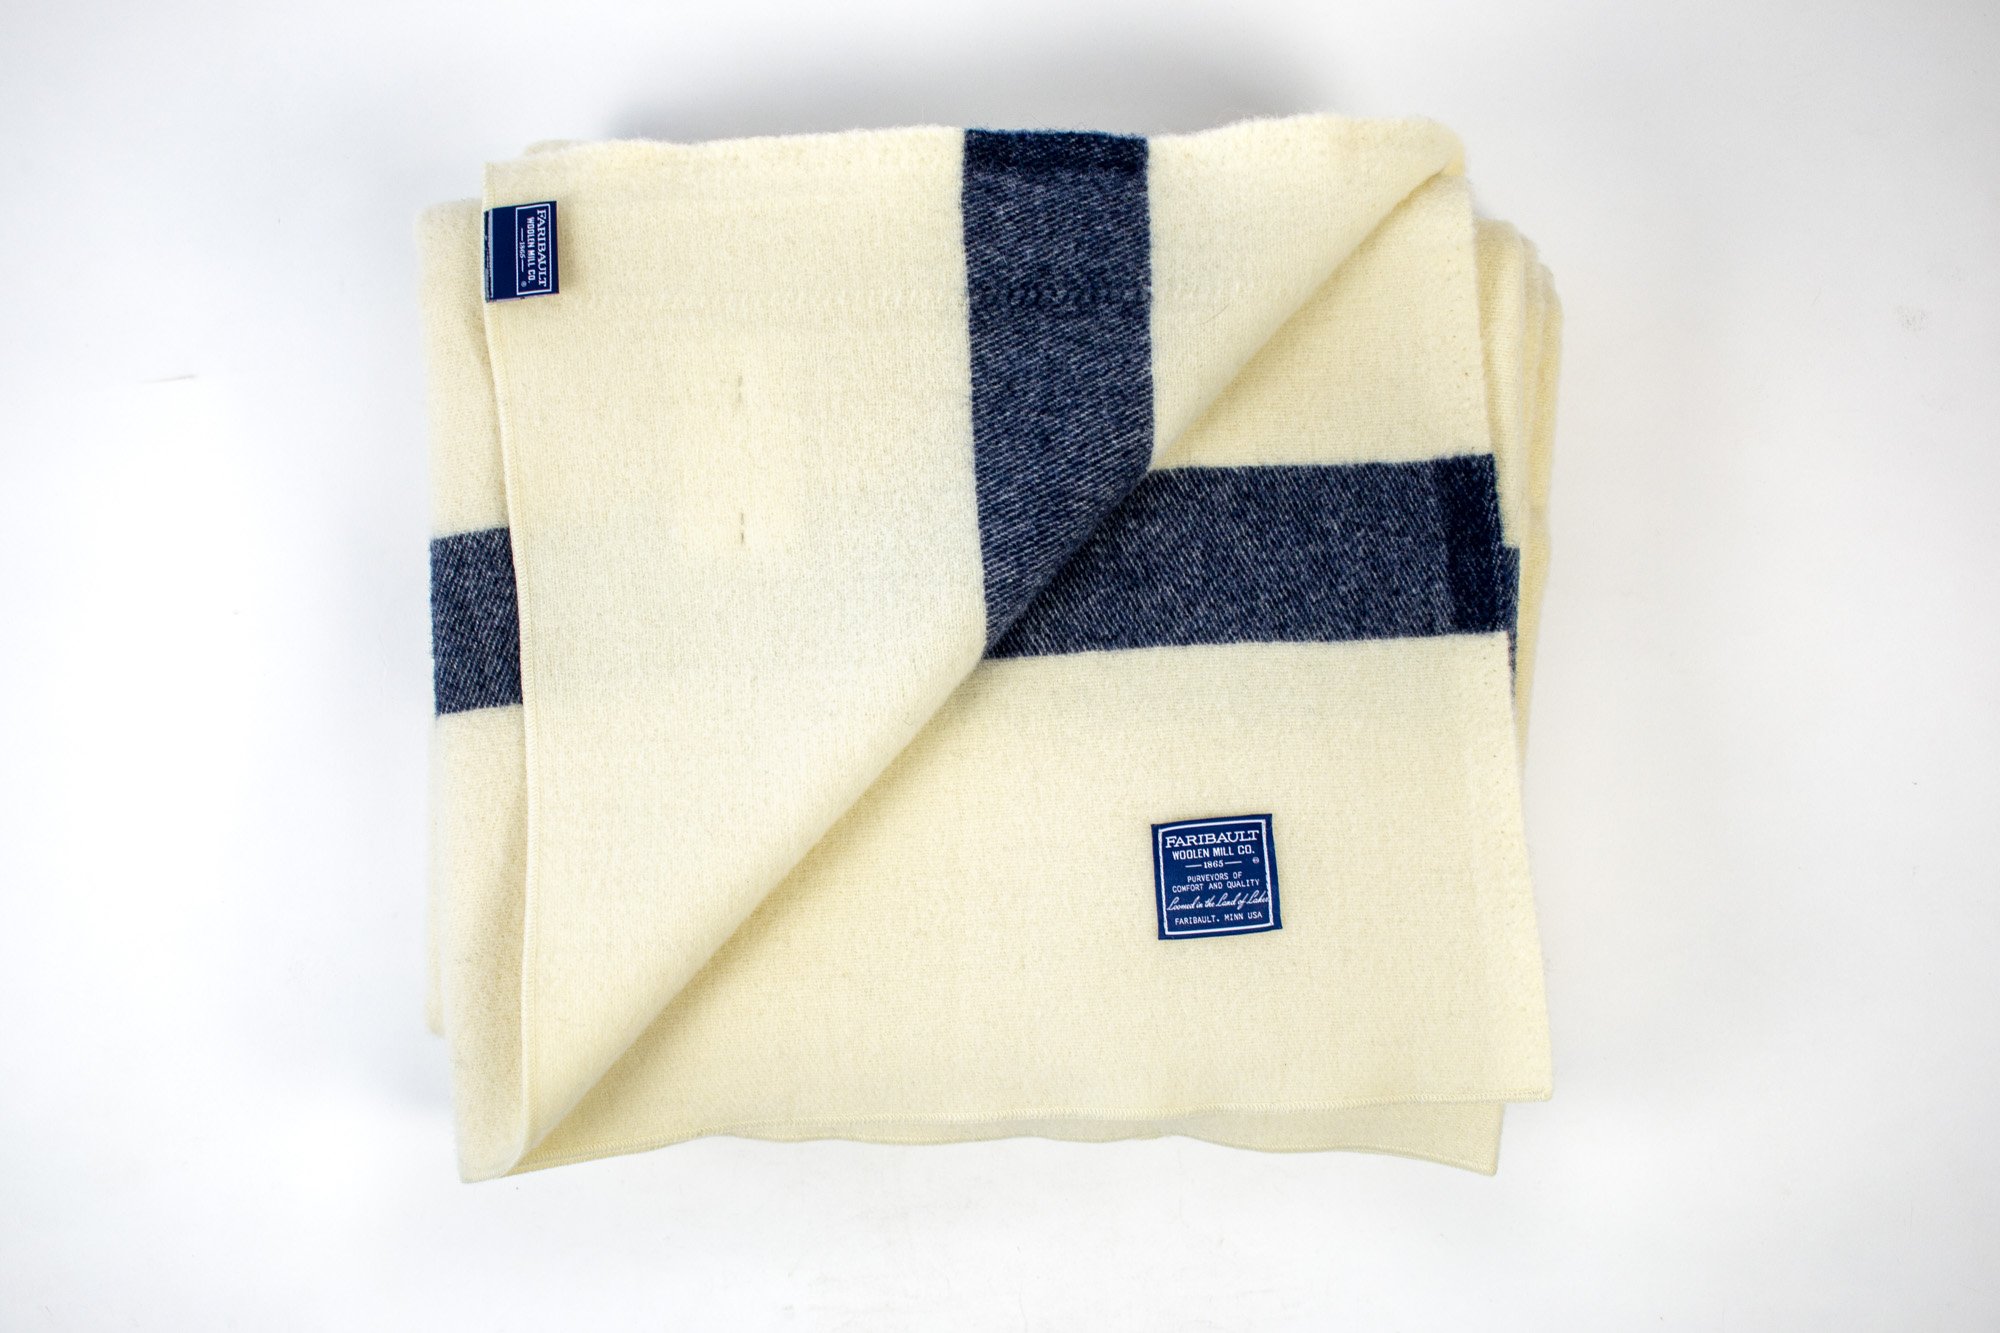 Giveaway – U.S. Navy Blanket (without the Navy) from the Heddels Shop